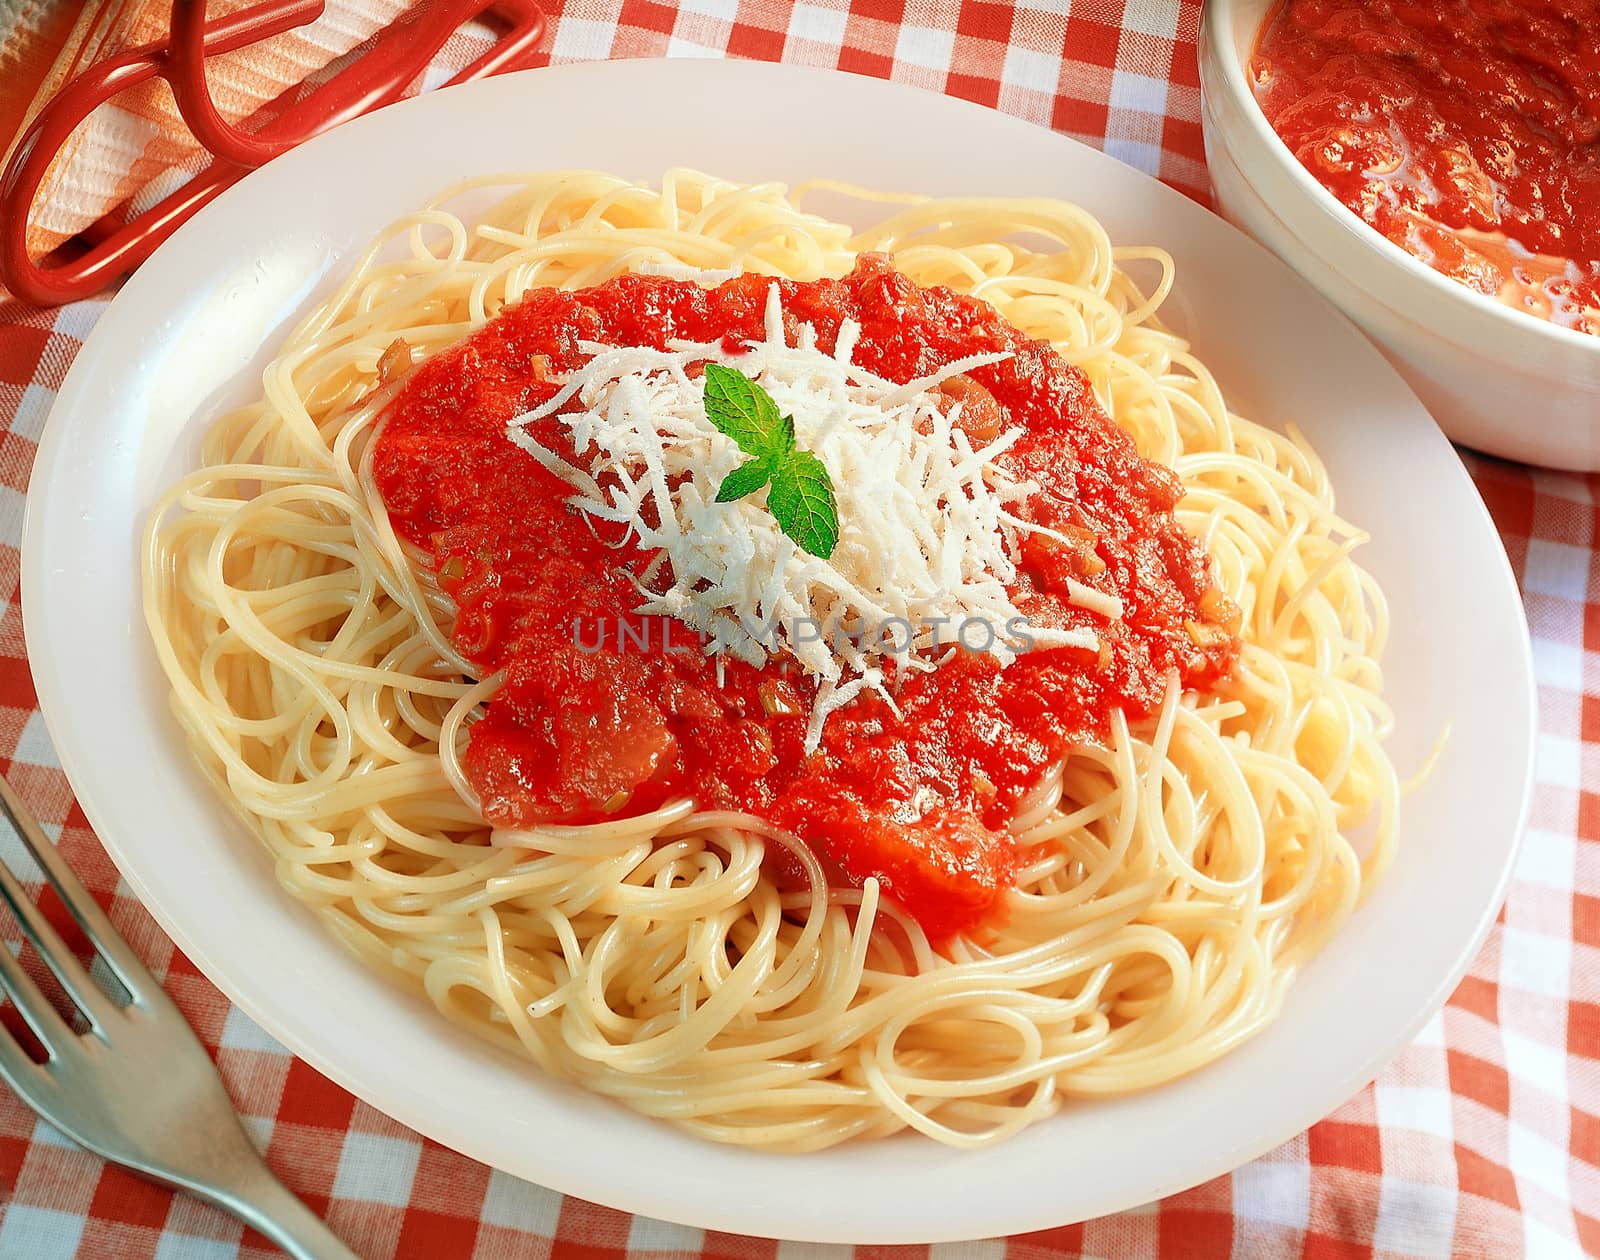 Spaghetti served with tomato sauce and cheese.